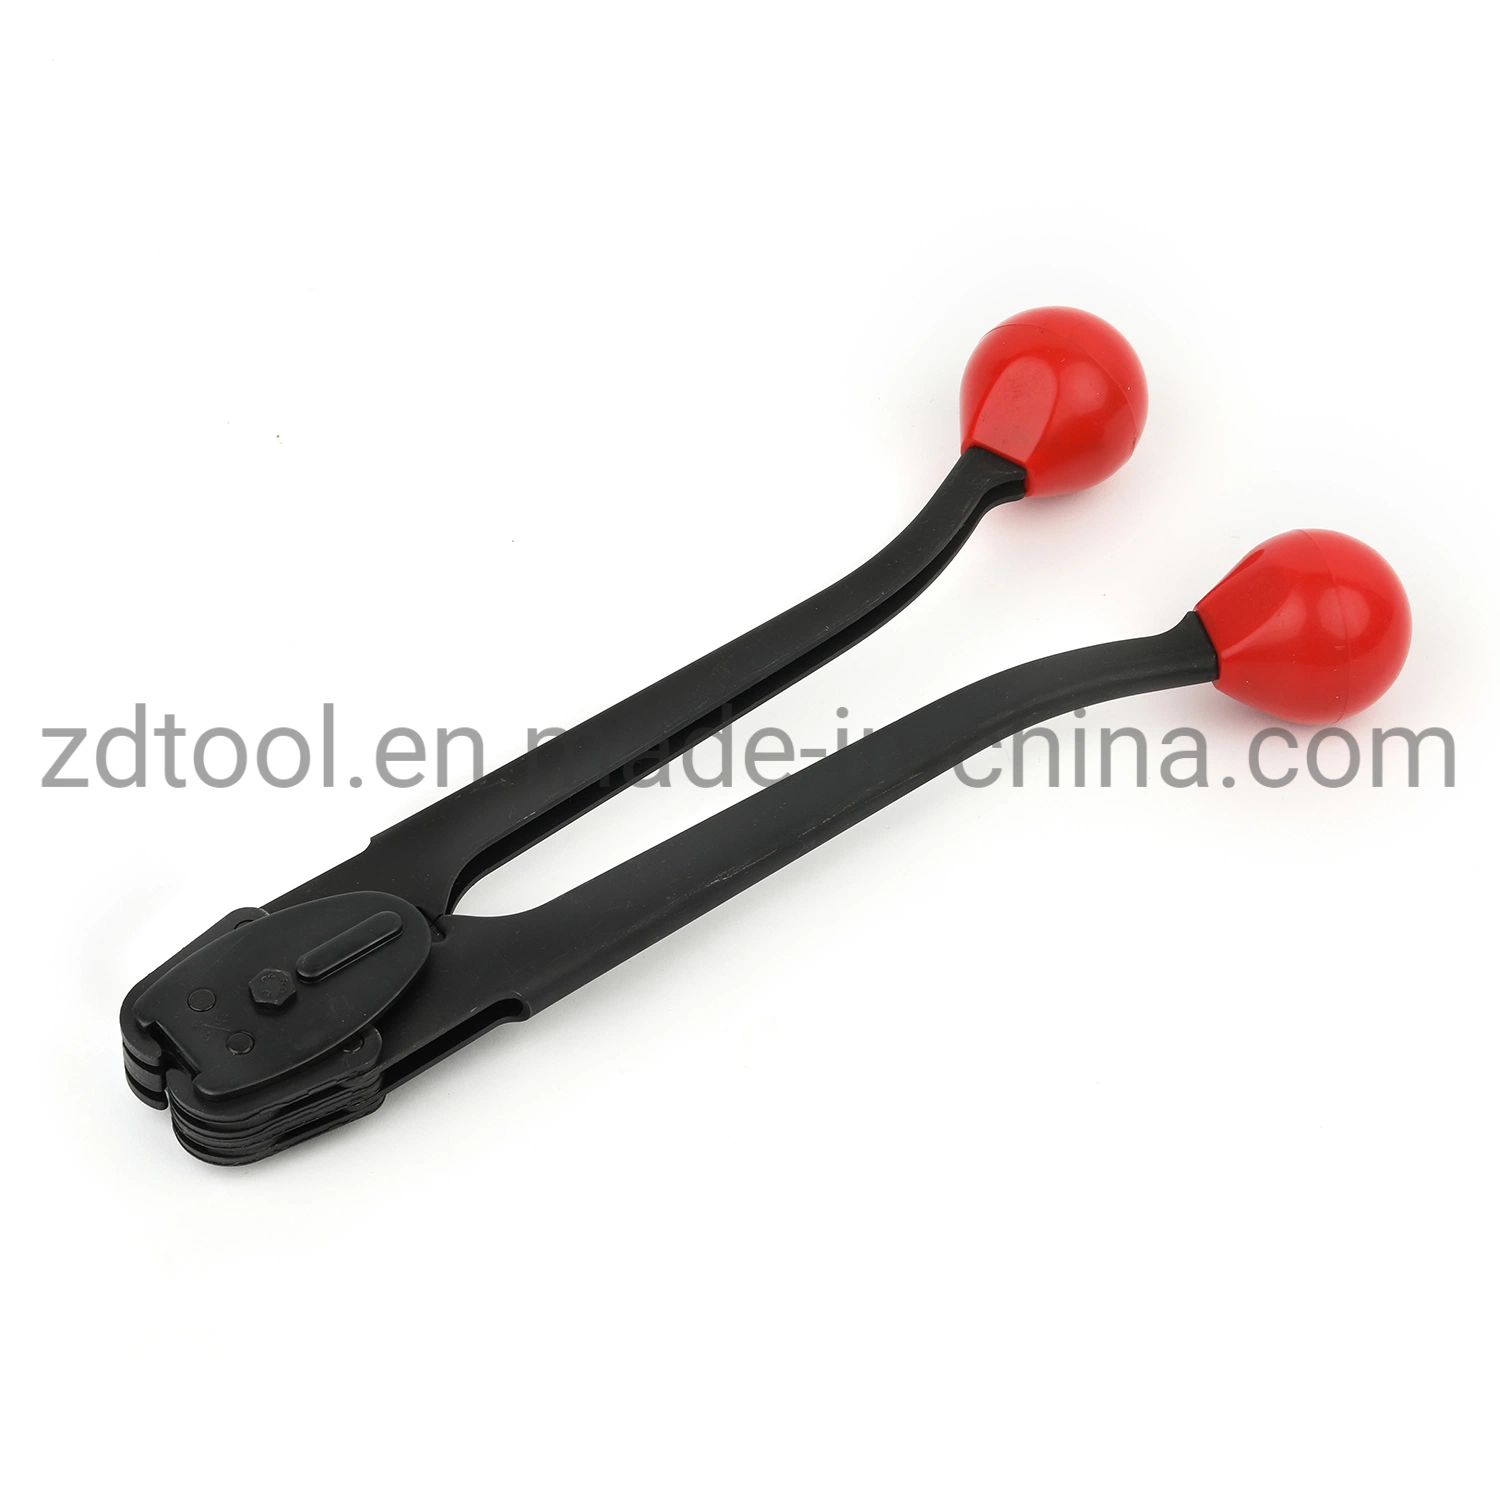 Steel Strap Tensioner Tool for Strapping Machine (HB810)